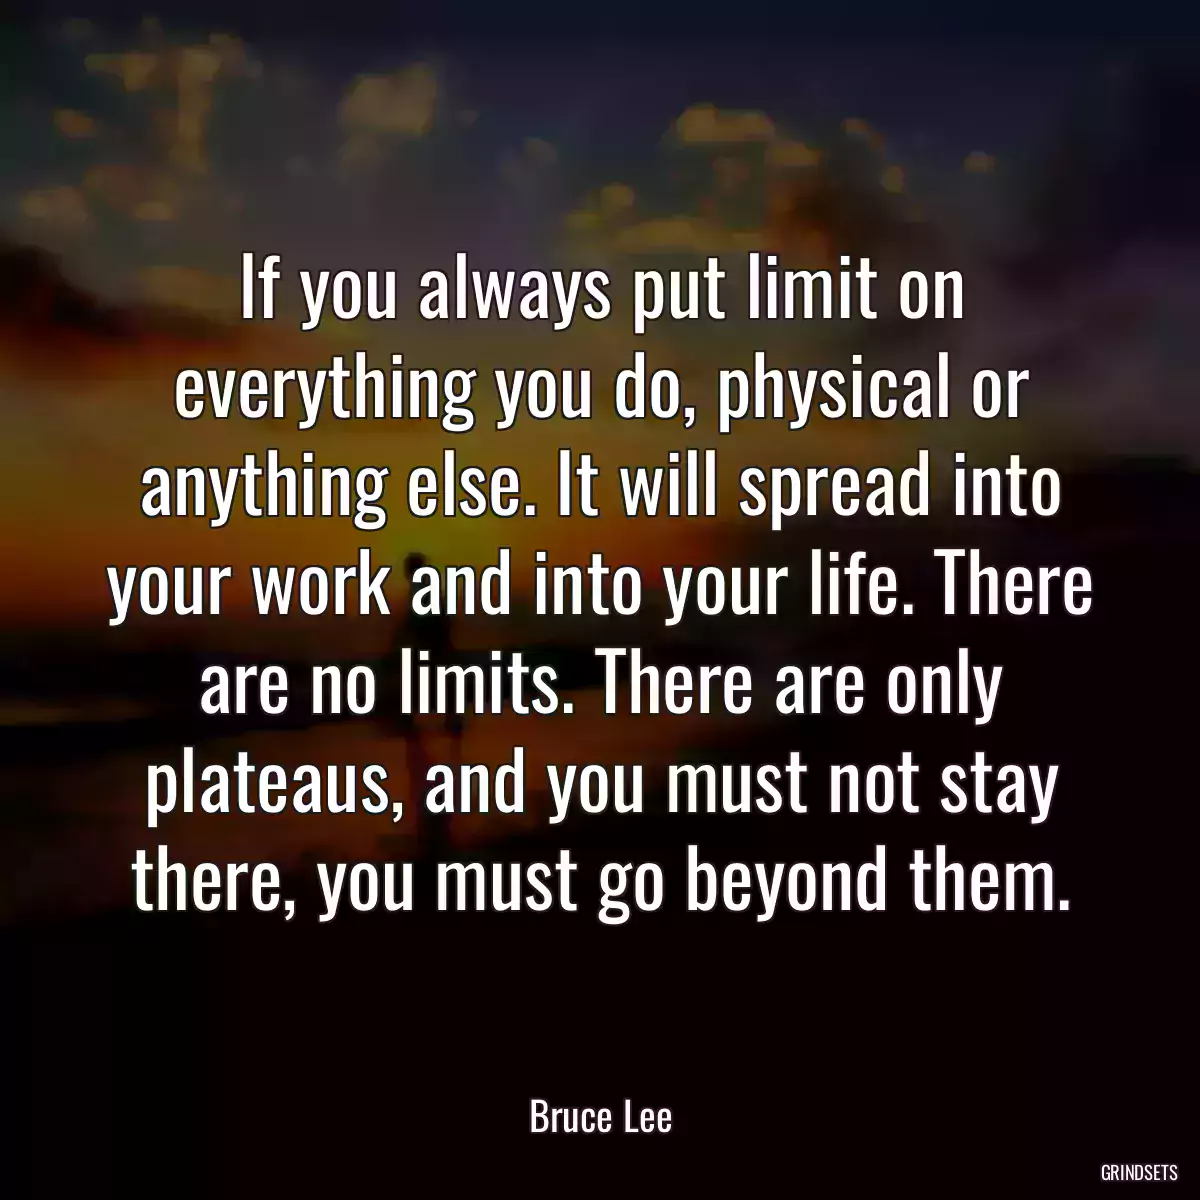 If you always put limit on everything you do, physical or anything else. It will spread into your work and into your life. There are no limits. There are only plateaus, and you must not stay there, you must go beyond them.